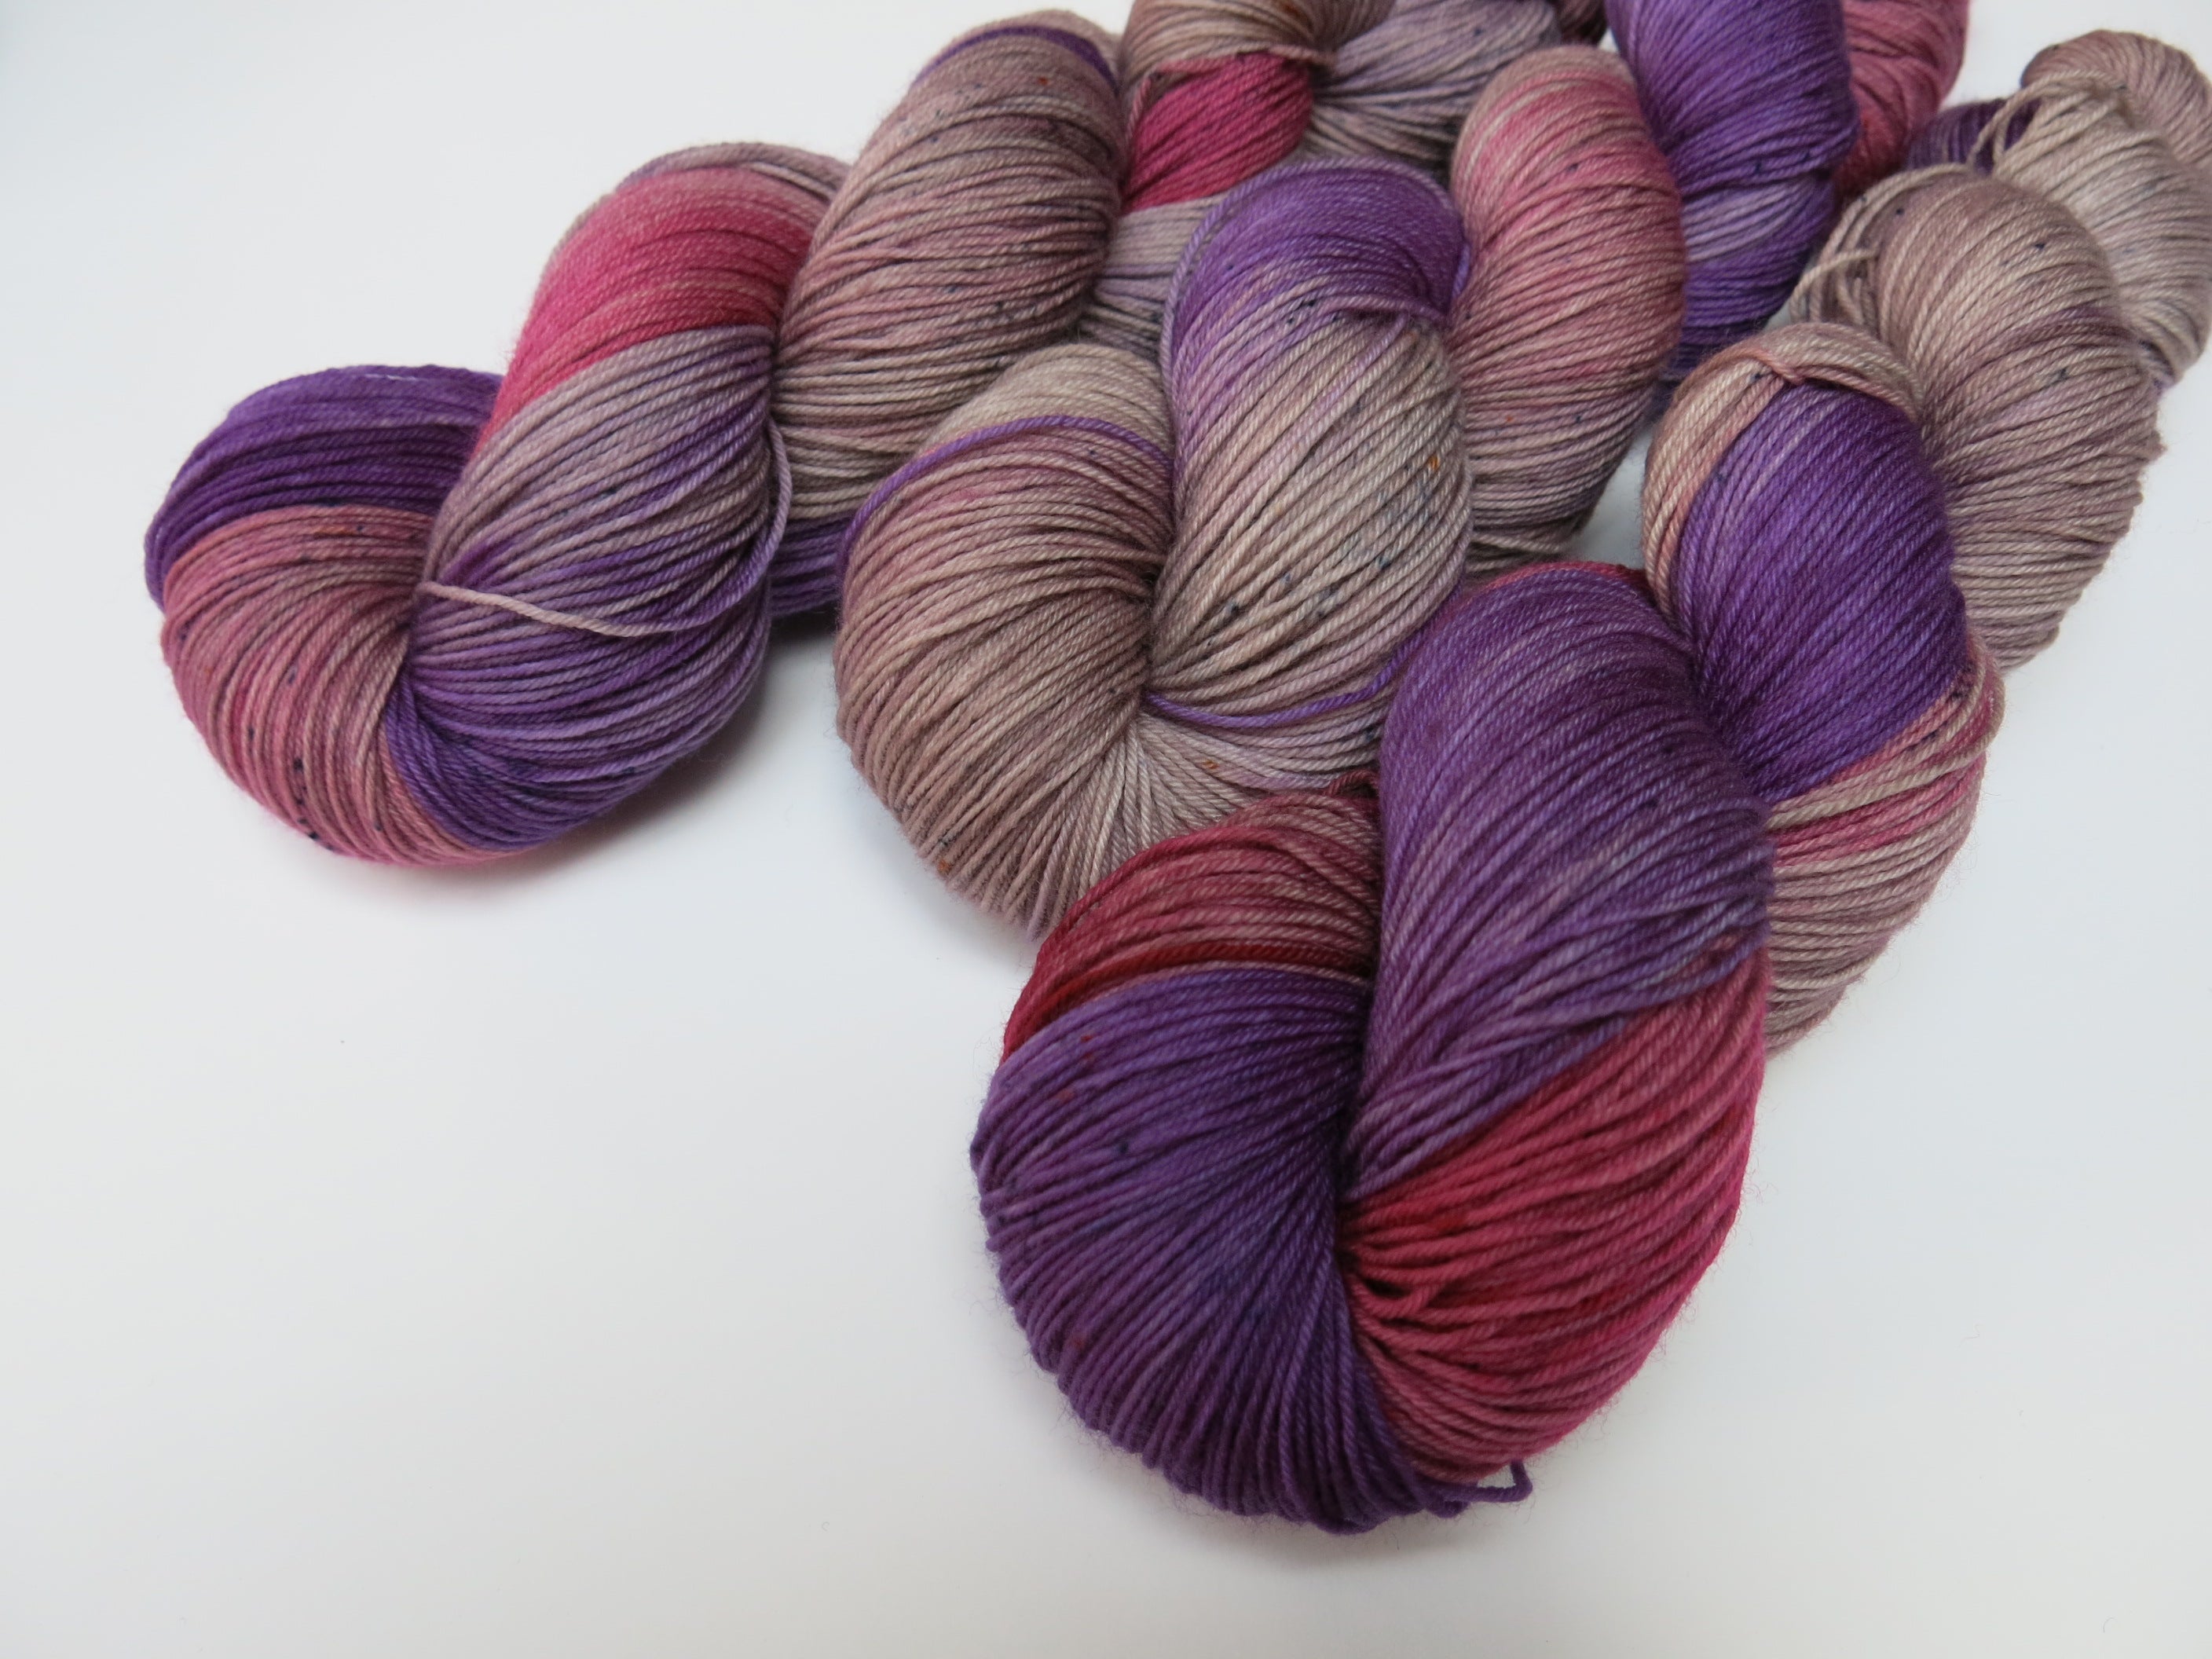 indie dyed yarn in purple and pink with speckles